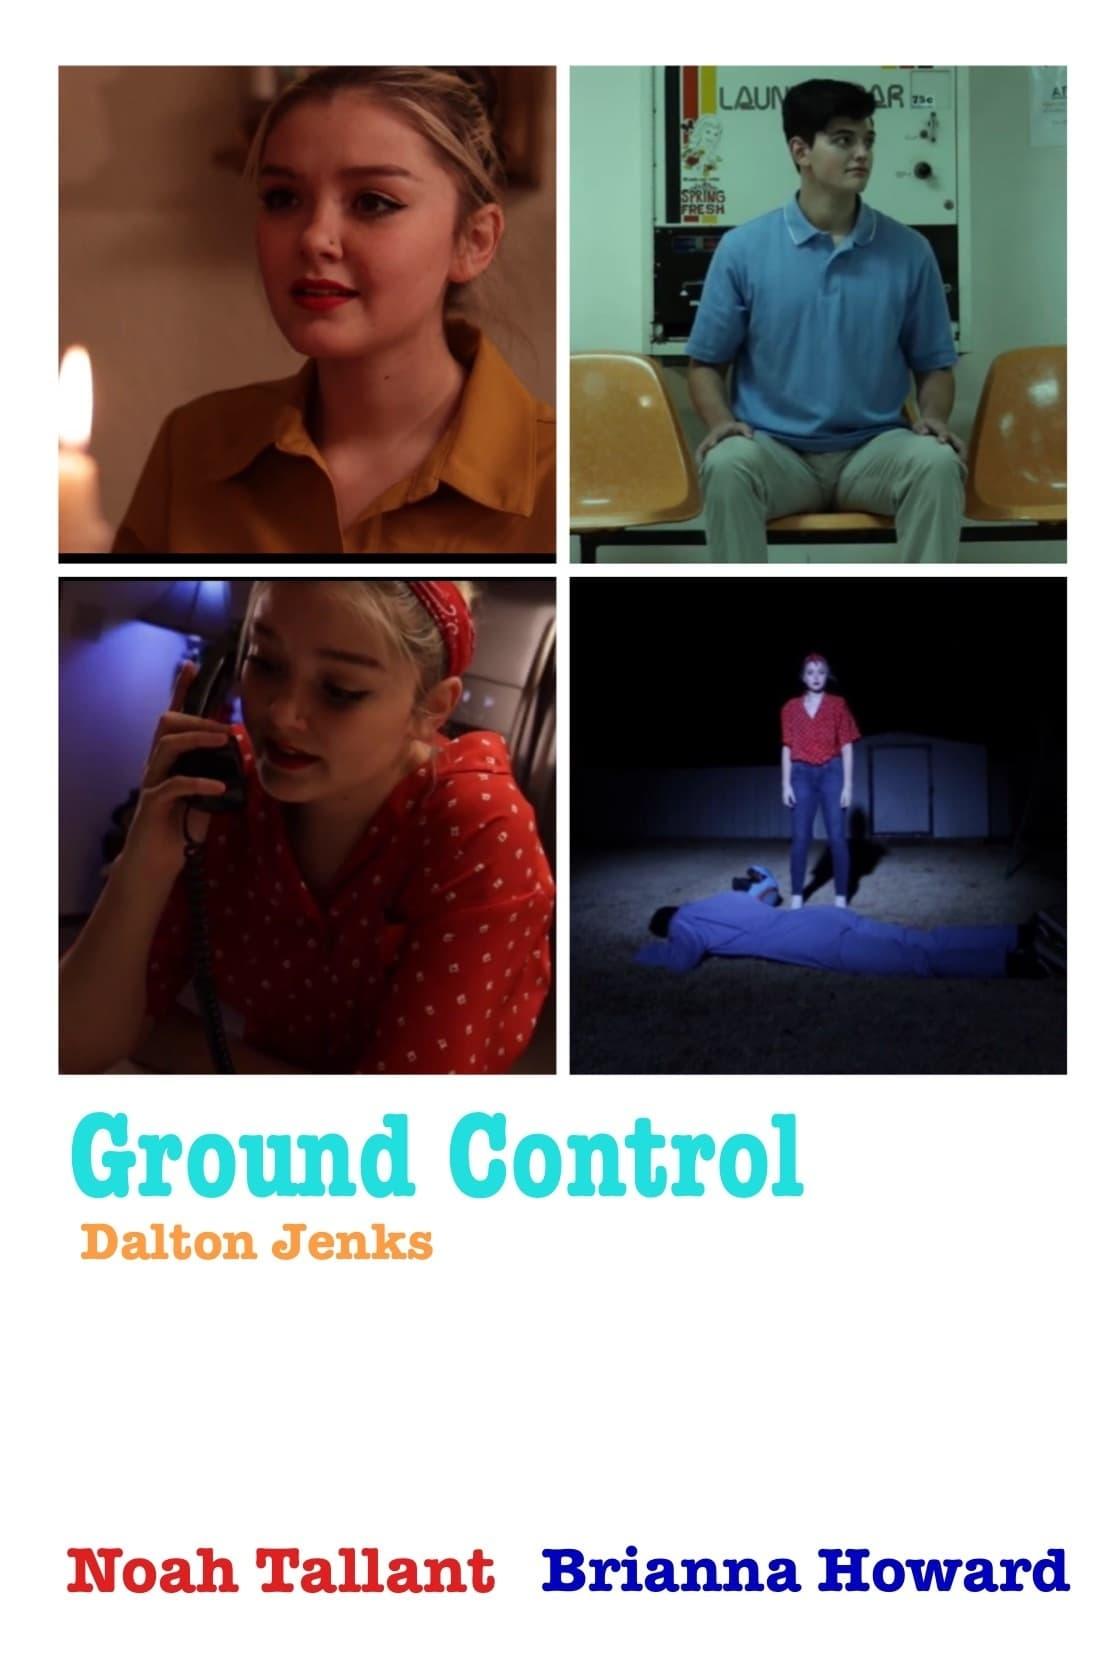 Ground Control poster